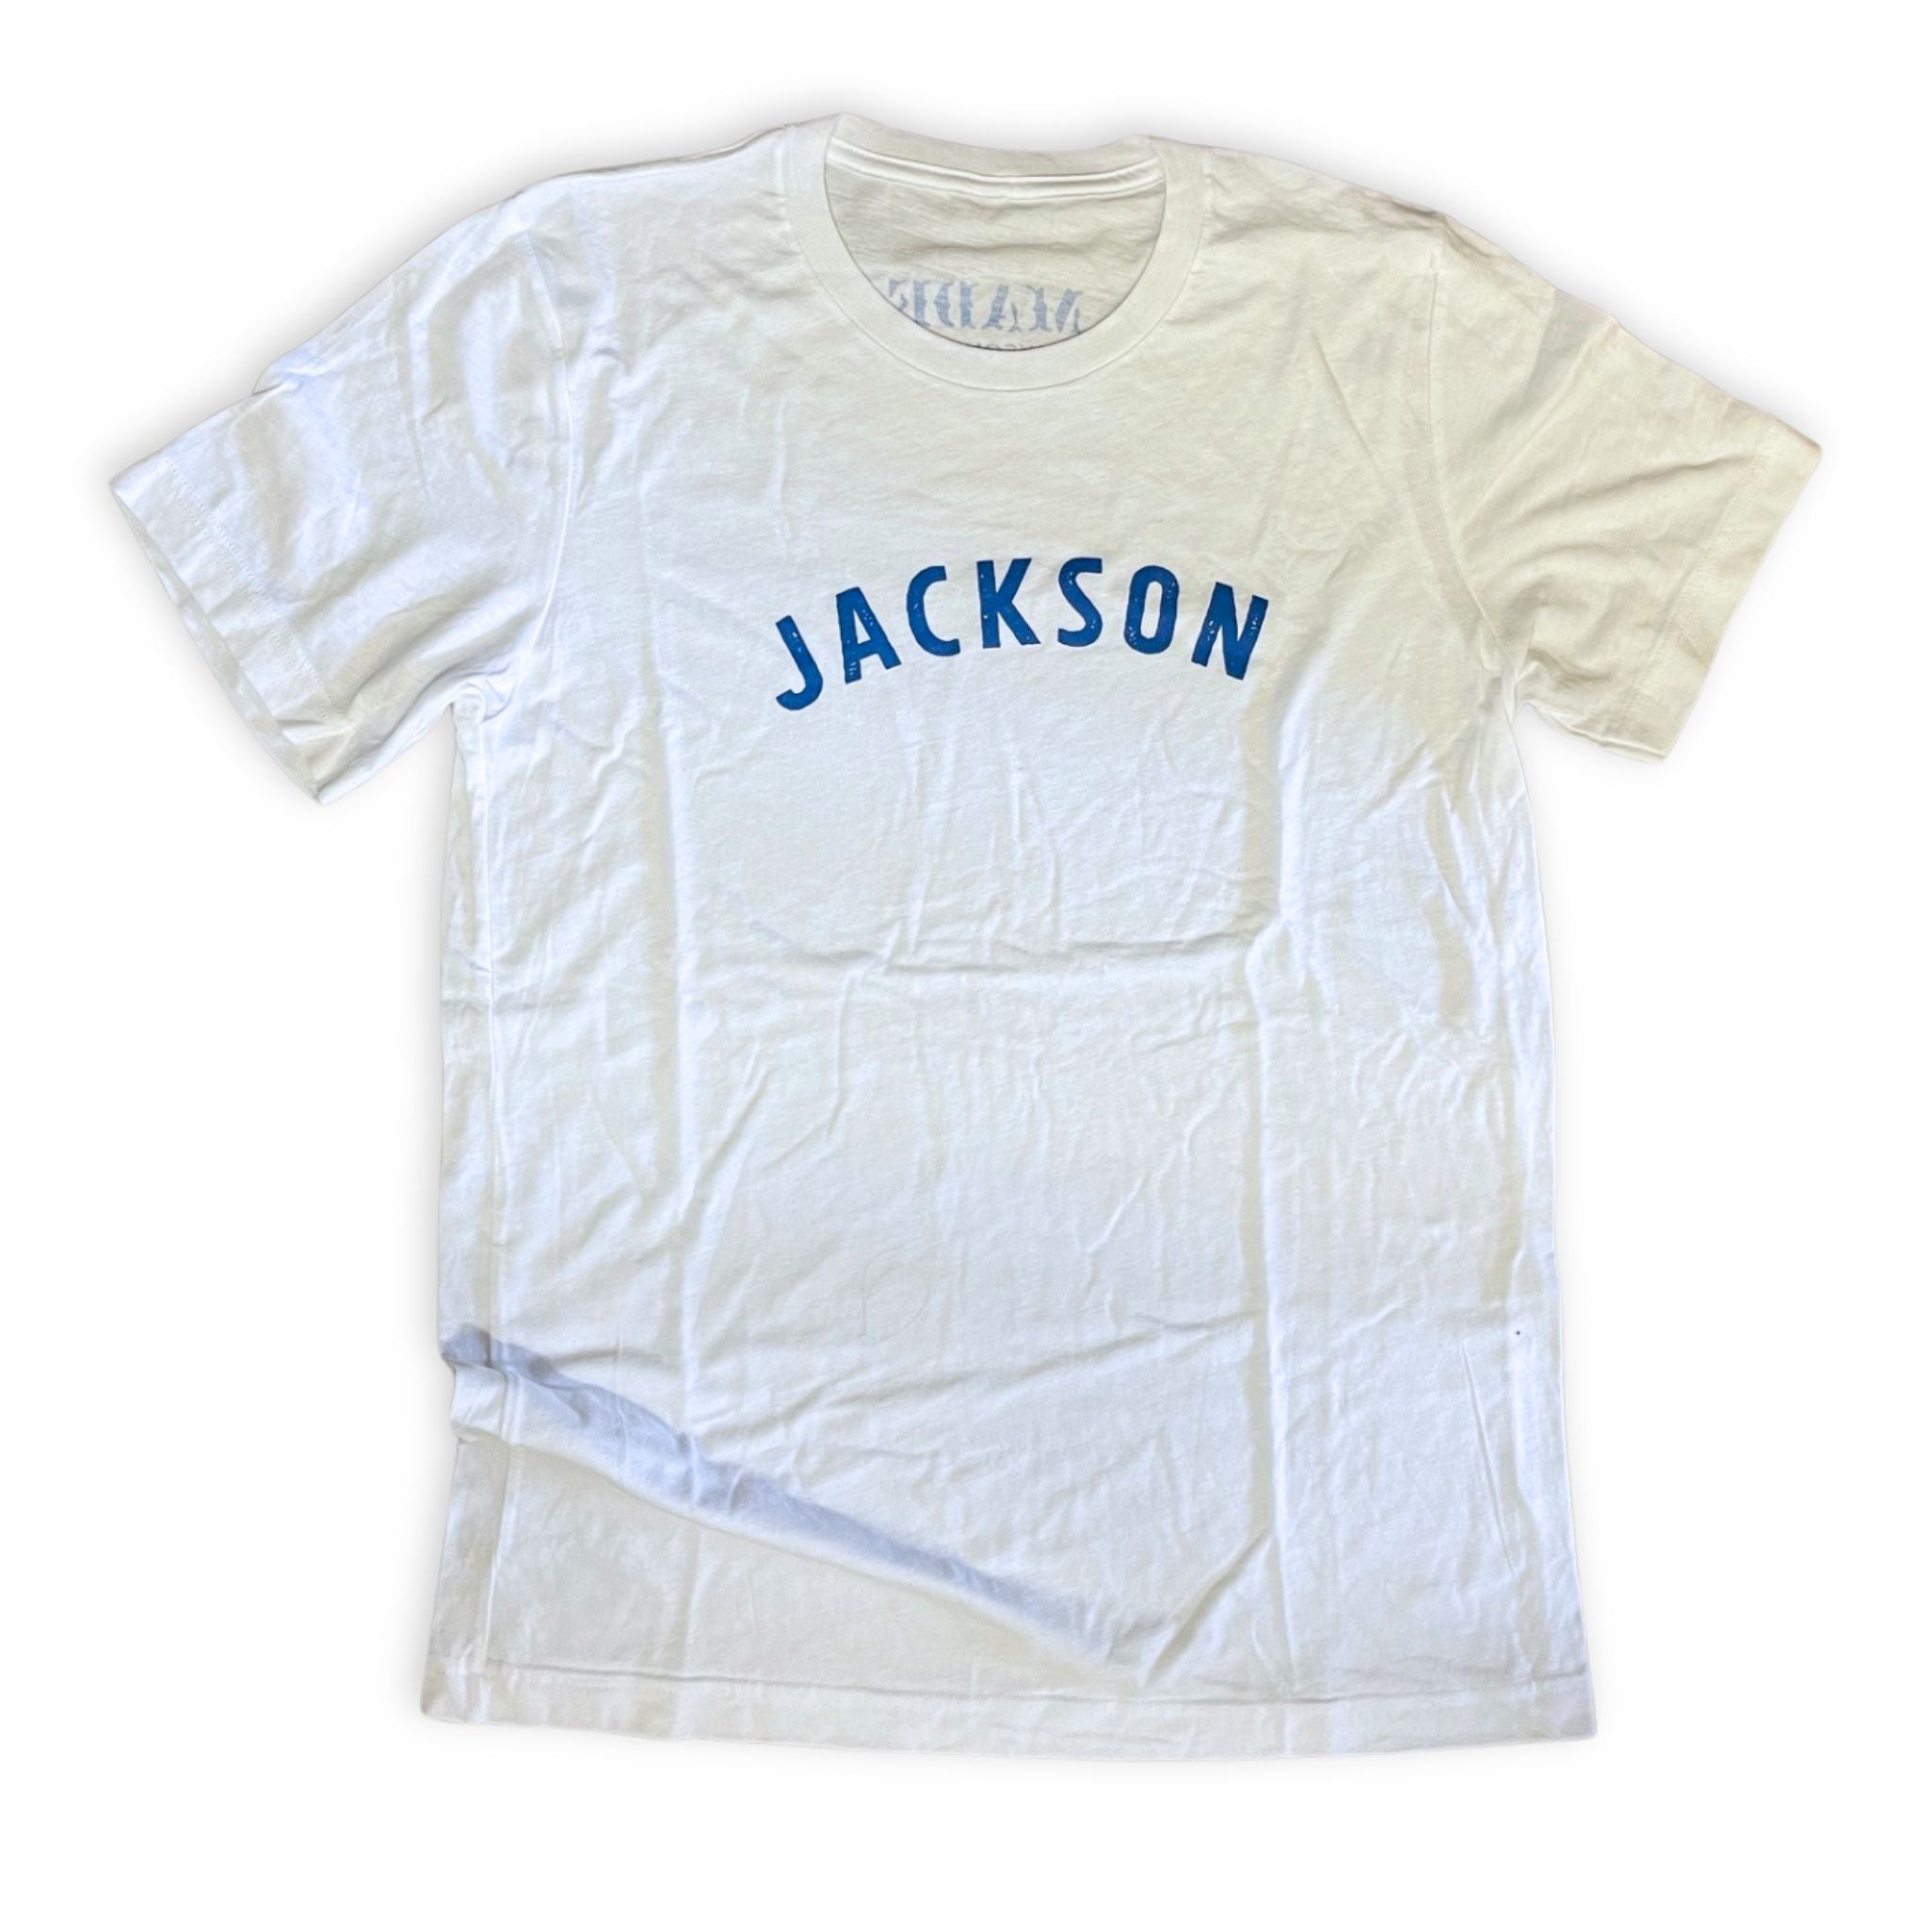 Classic White Tshirt with Jackson spelled across the chest in blue